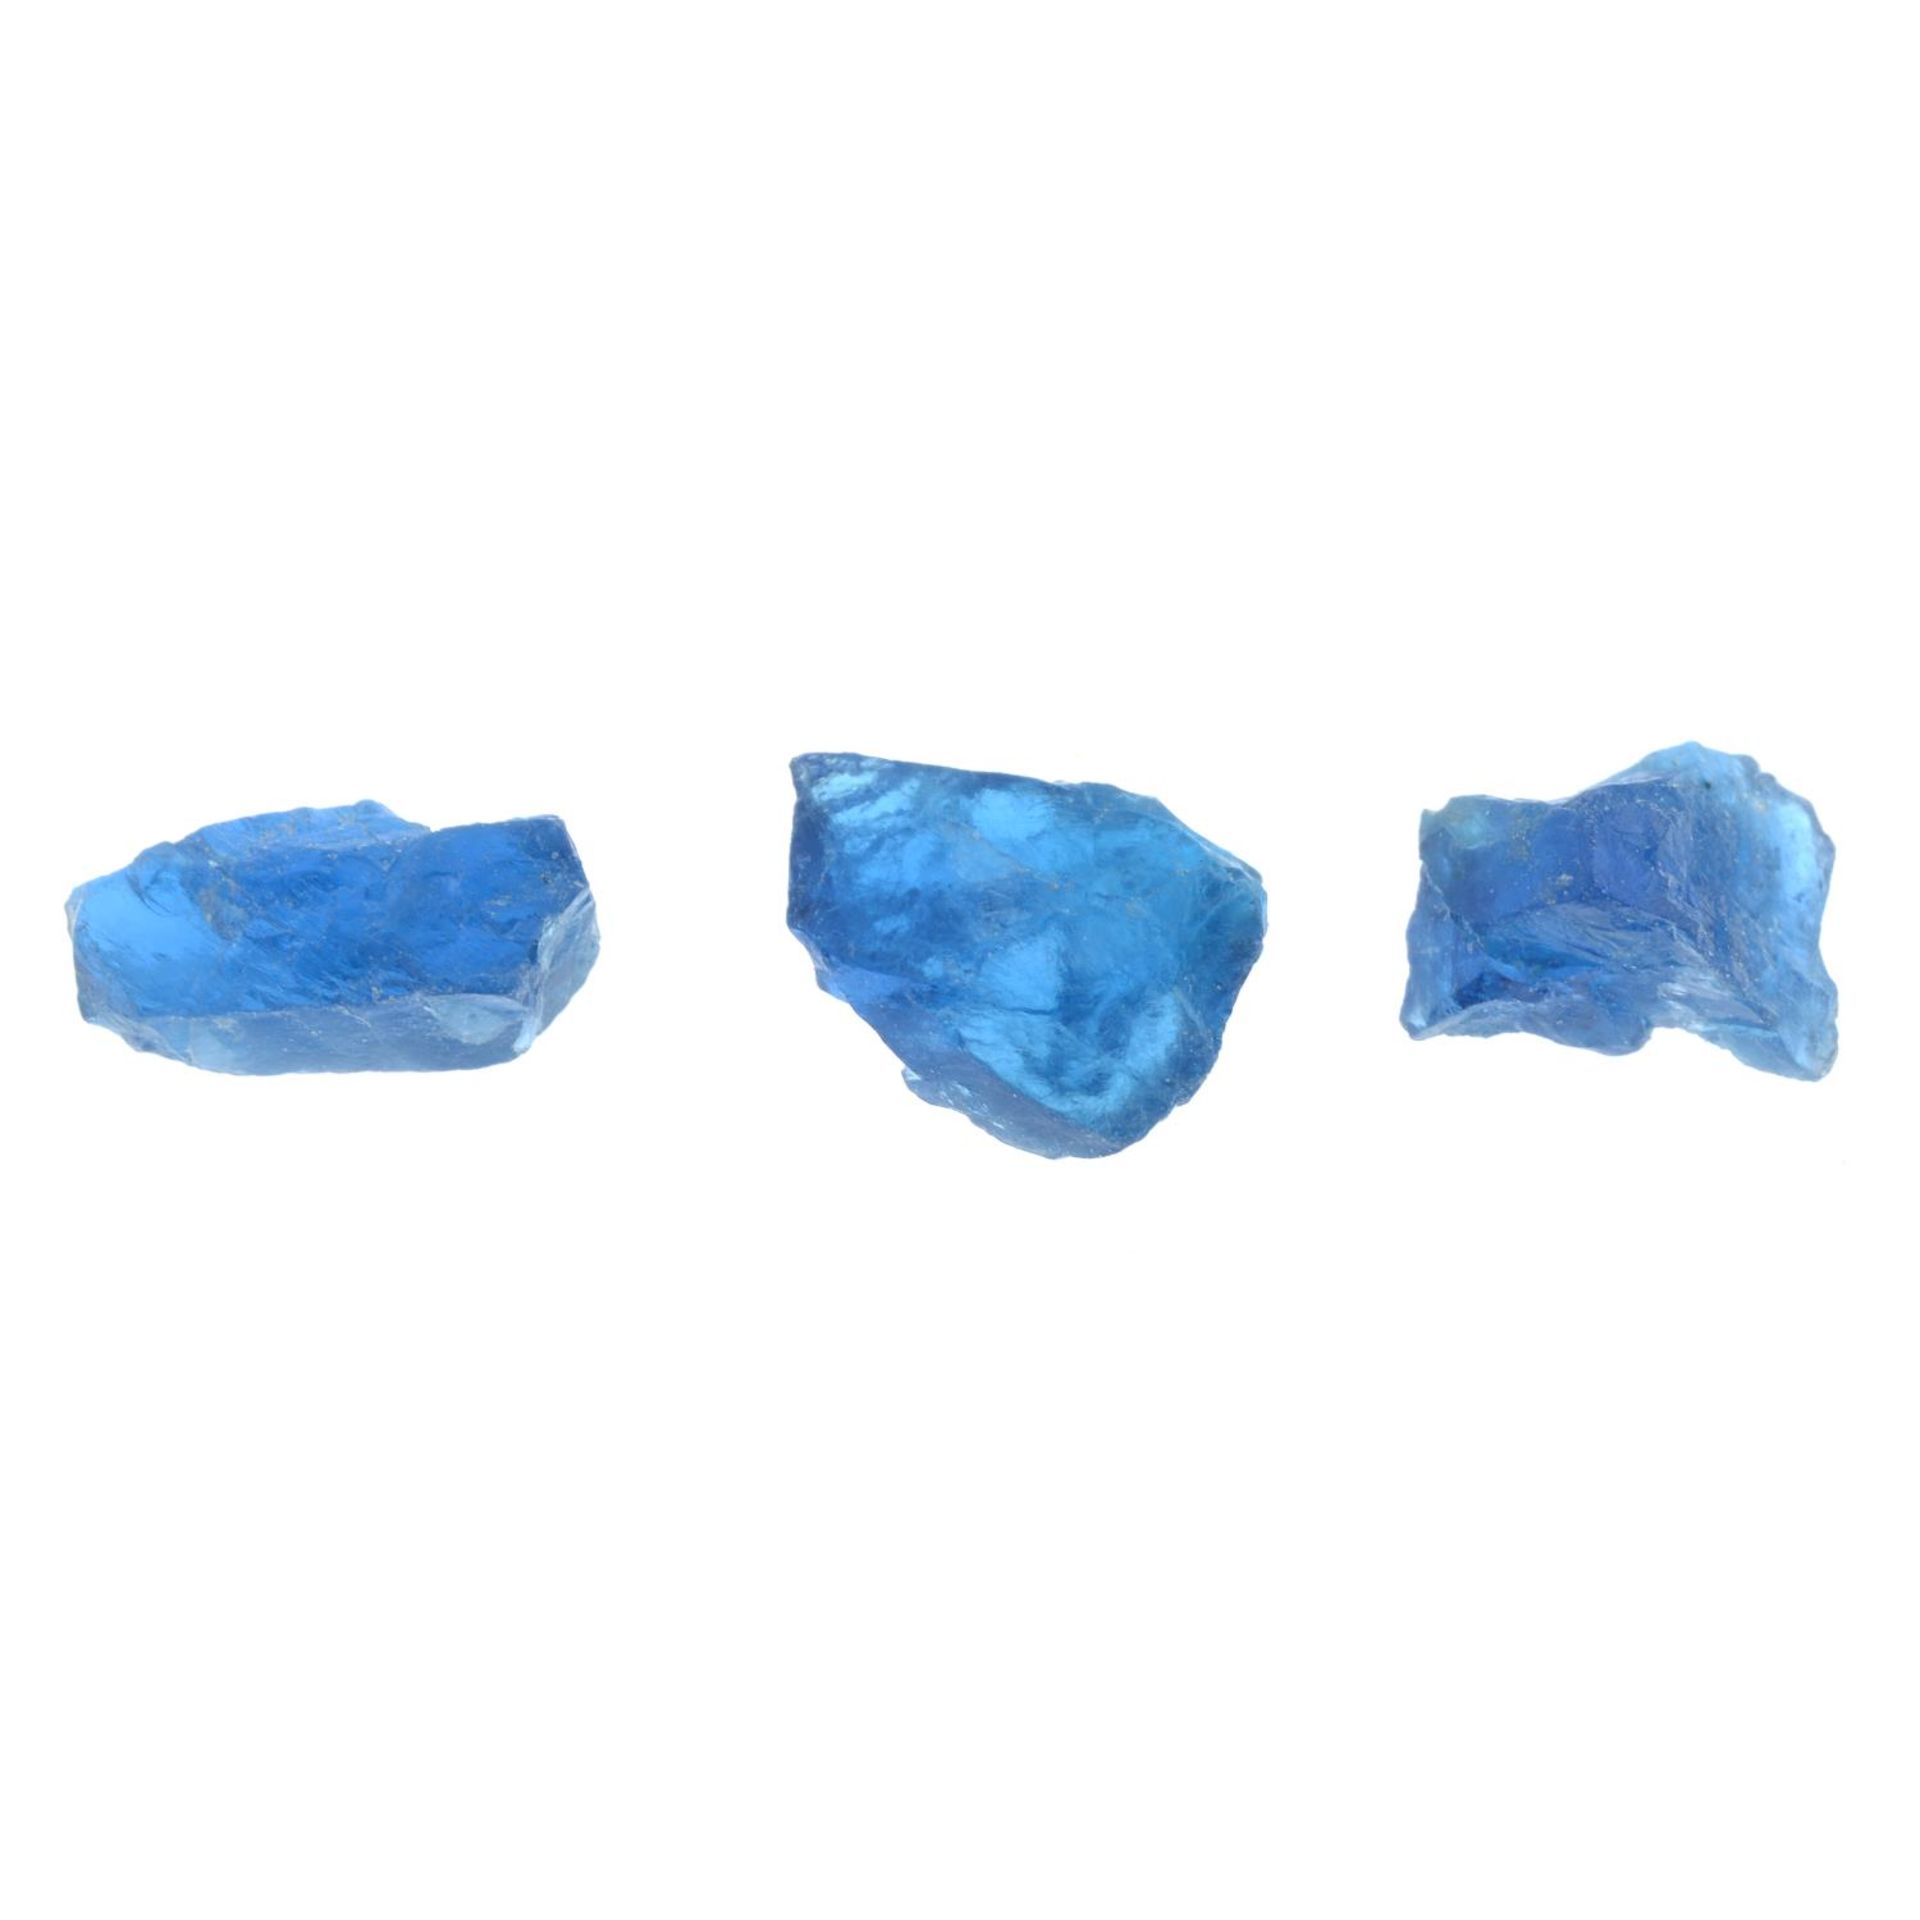 Selection of rough apatite.